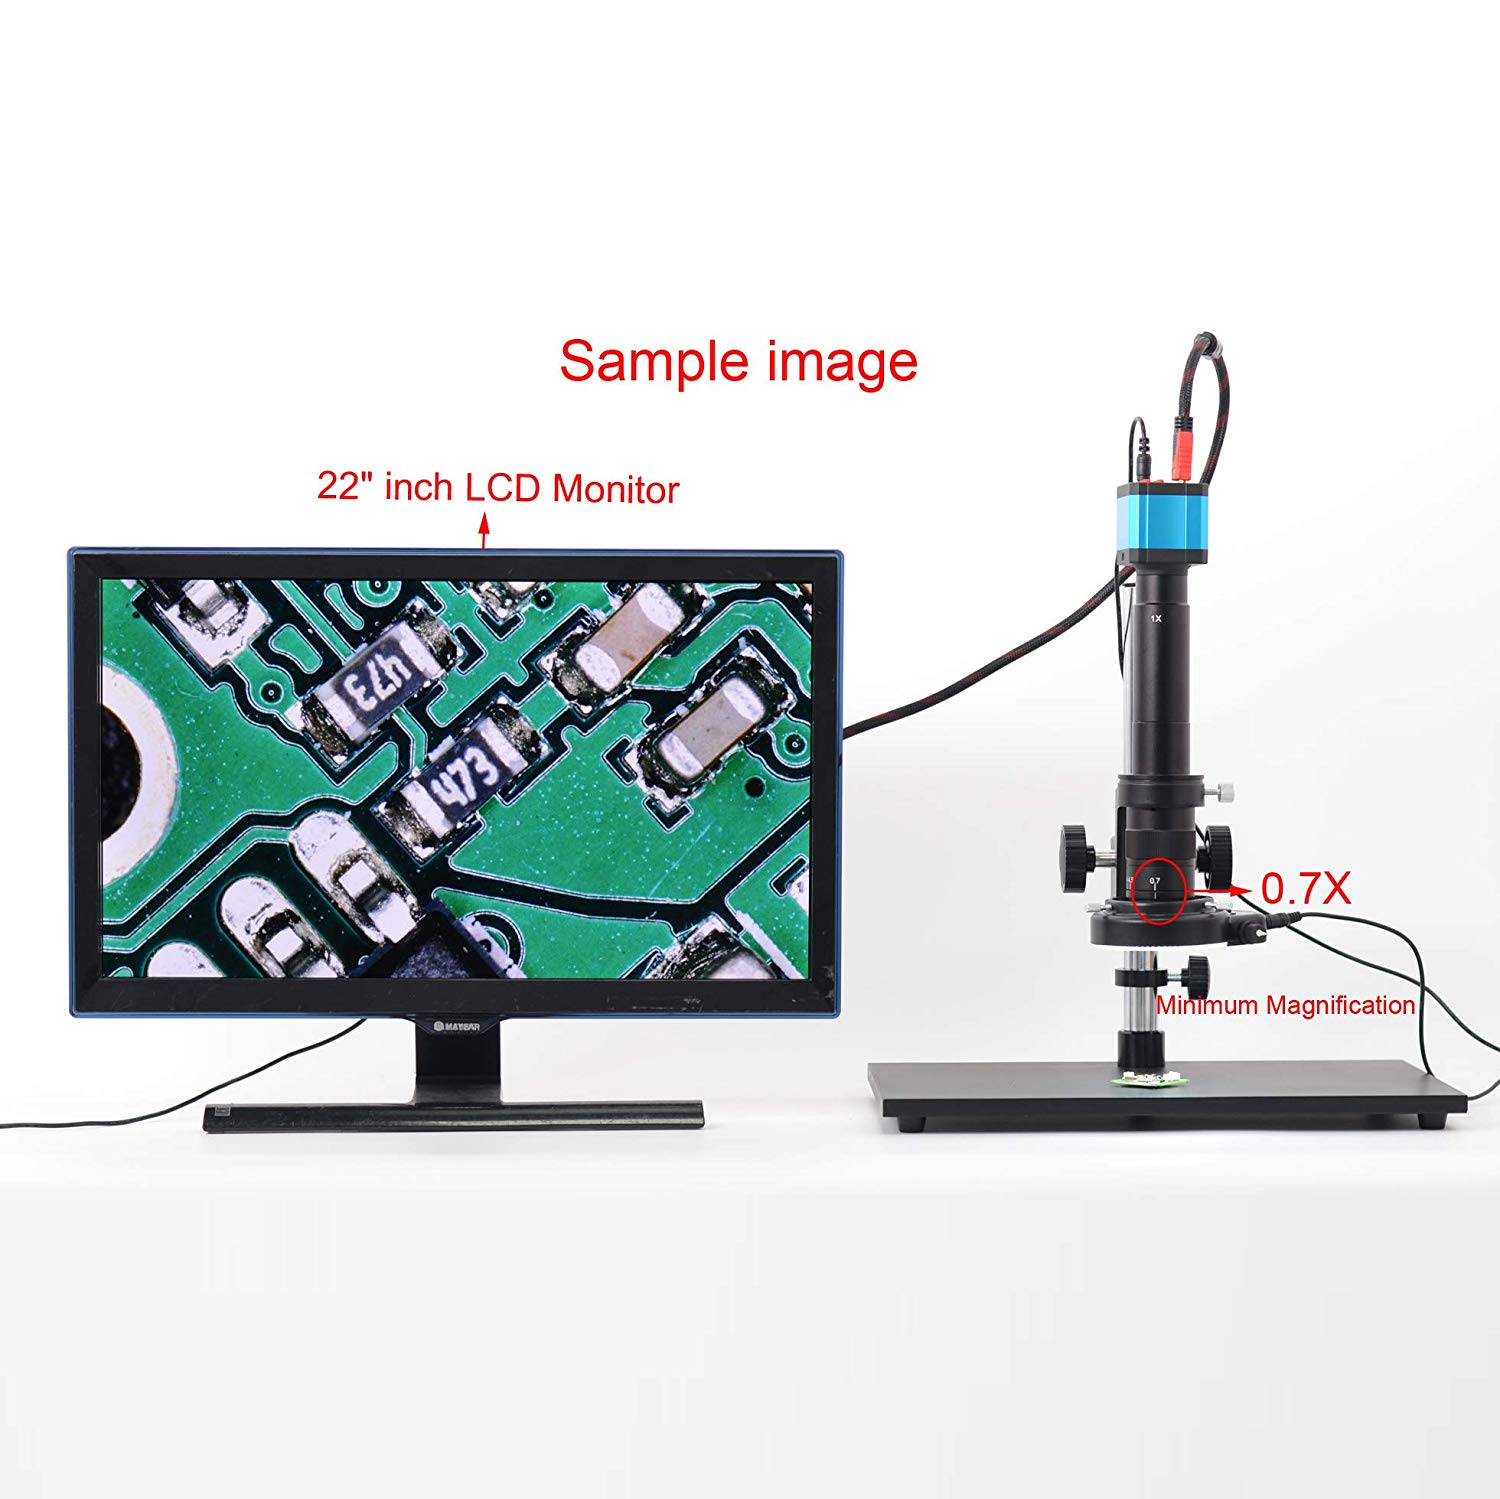 HAYEAR 14MP Monocular HDMI HD USB Digital Industry Video Microscope Camera Set Big Stereo Table Stand Zoom C-Mount Lens 144 LED Light (300X Zoon Lens)